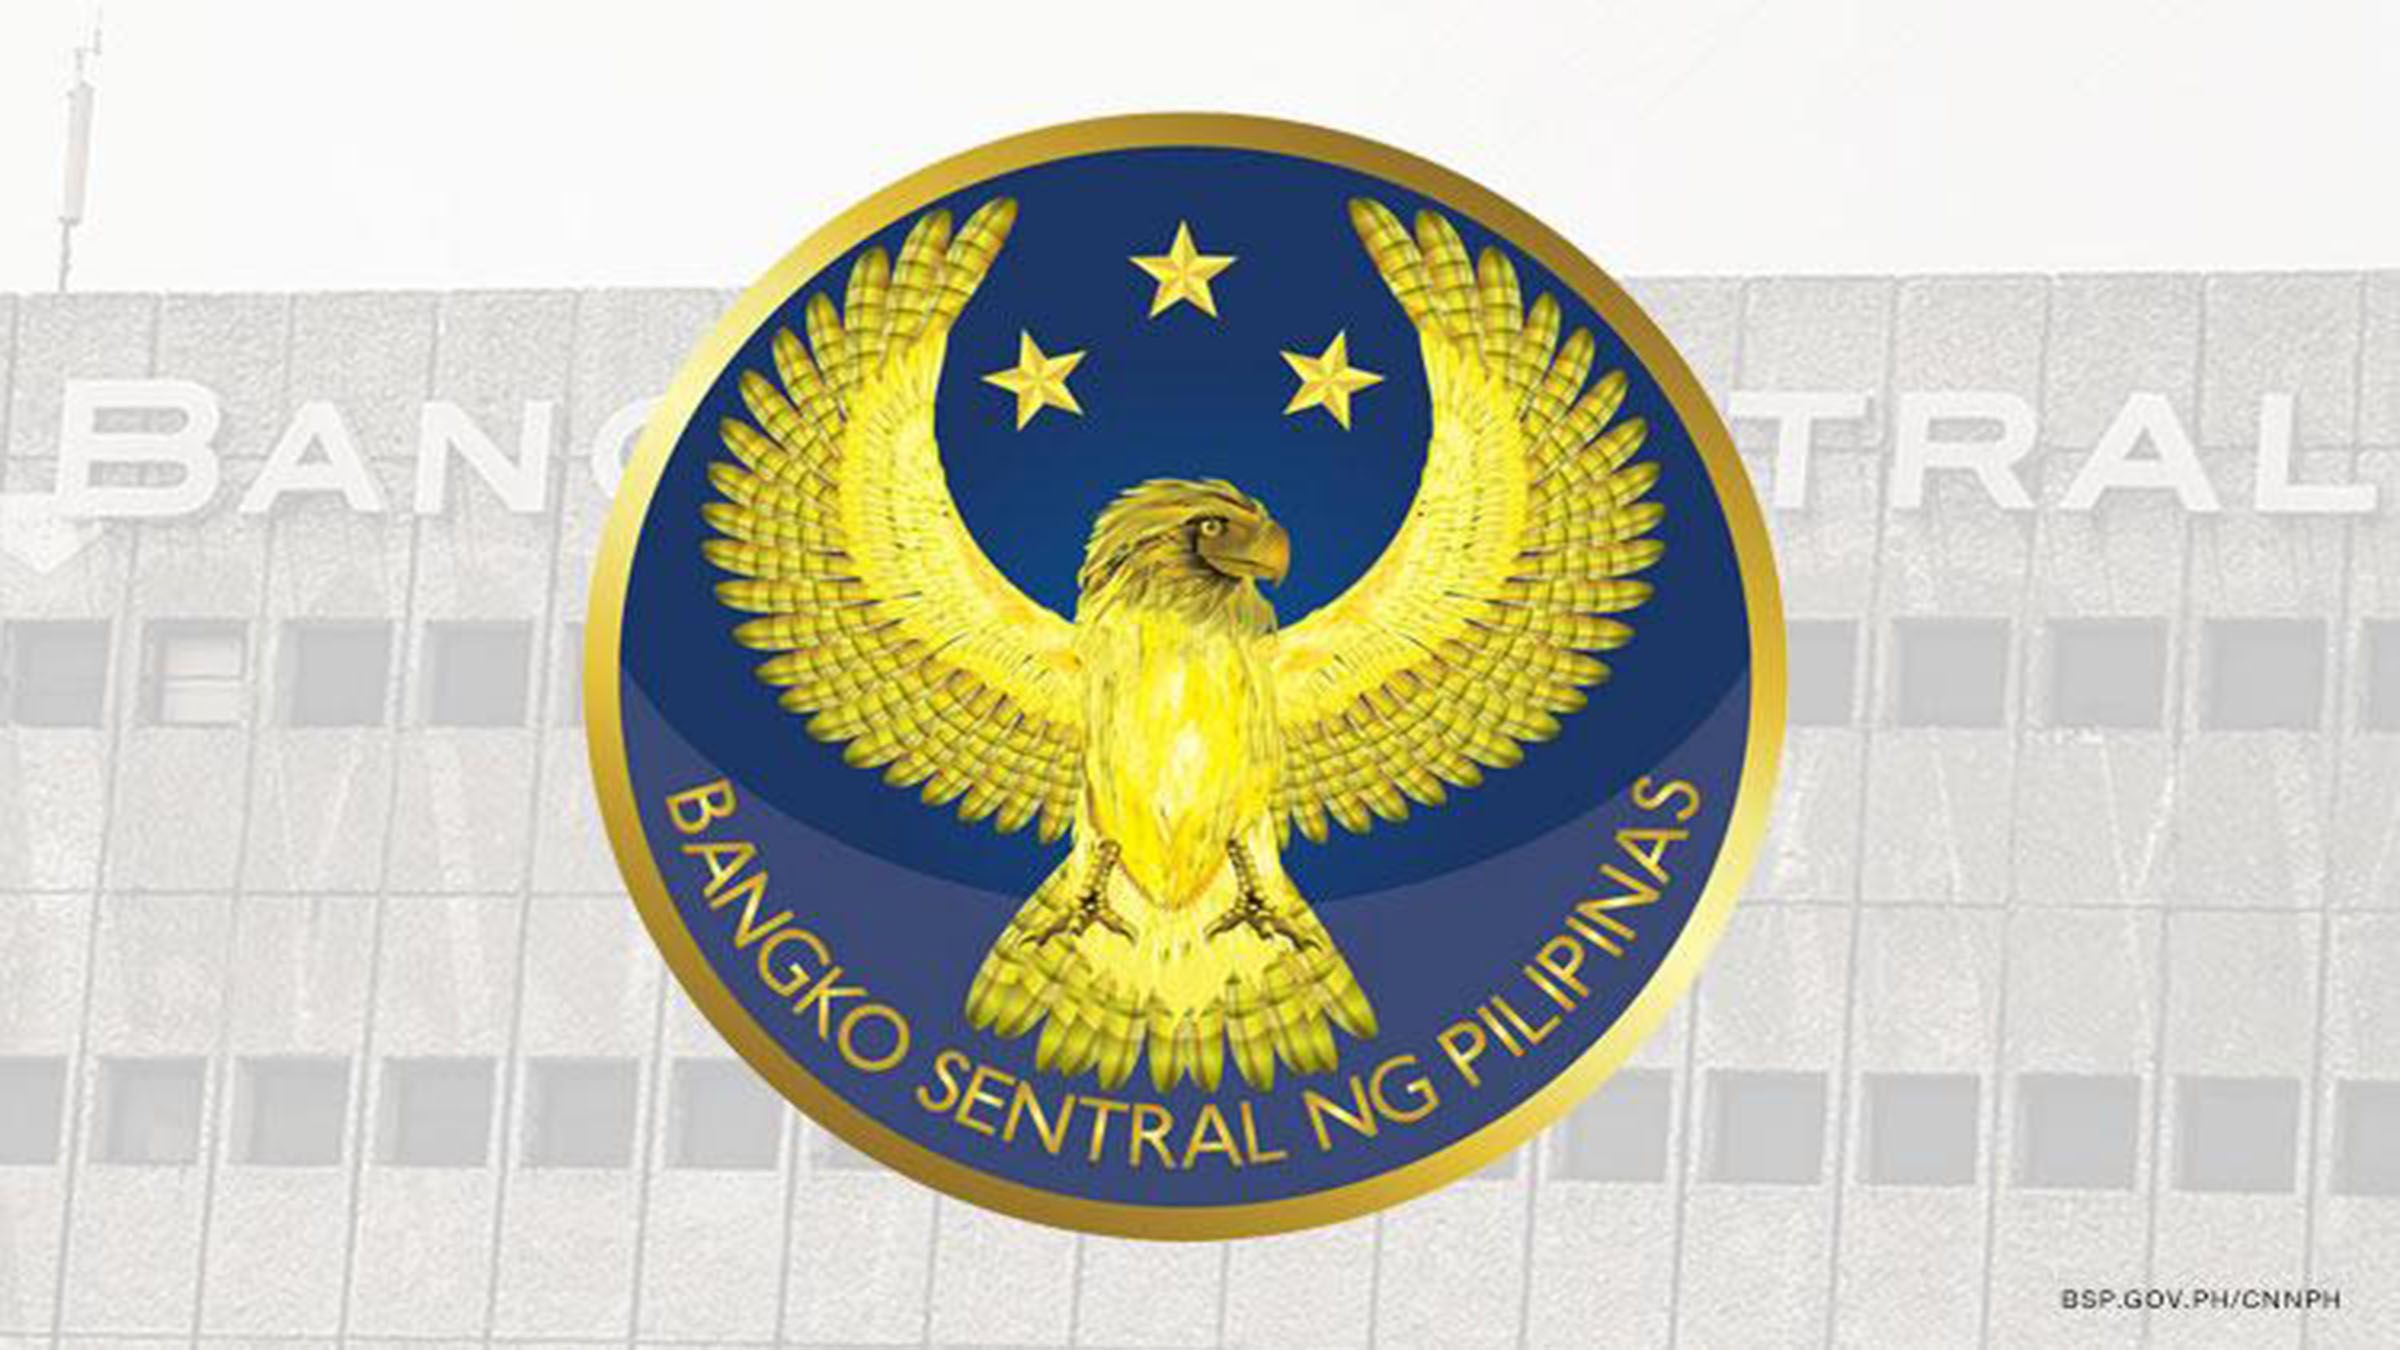 New Rates take effect March 27, BSP